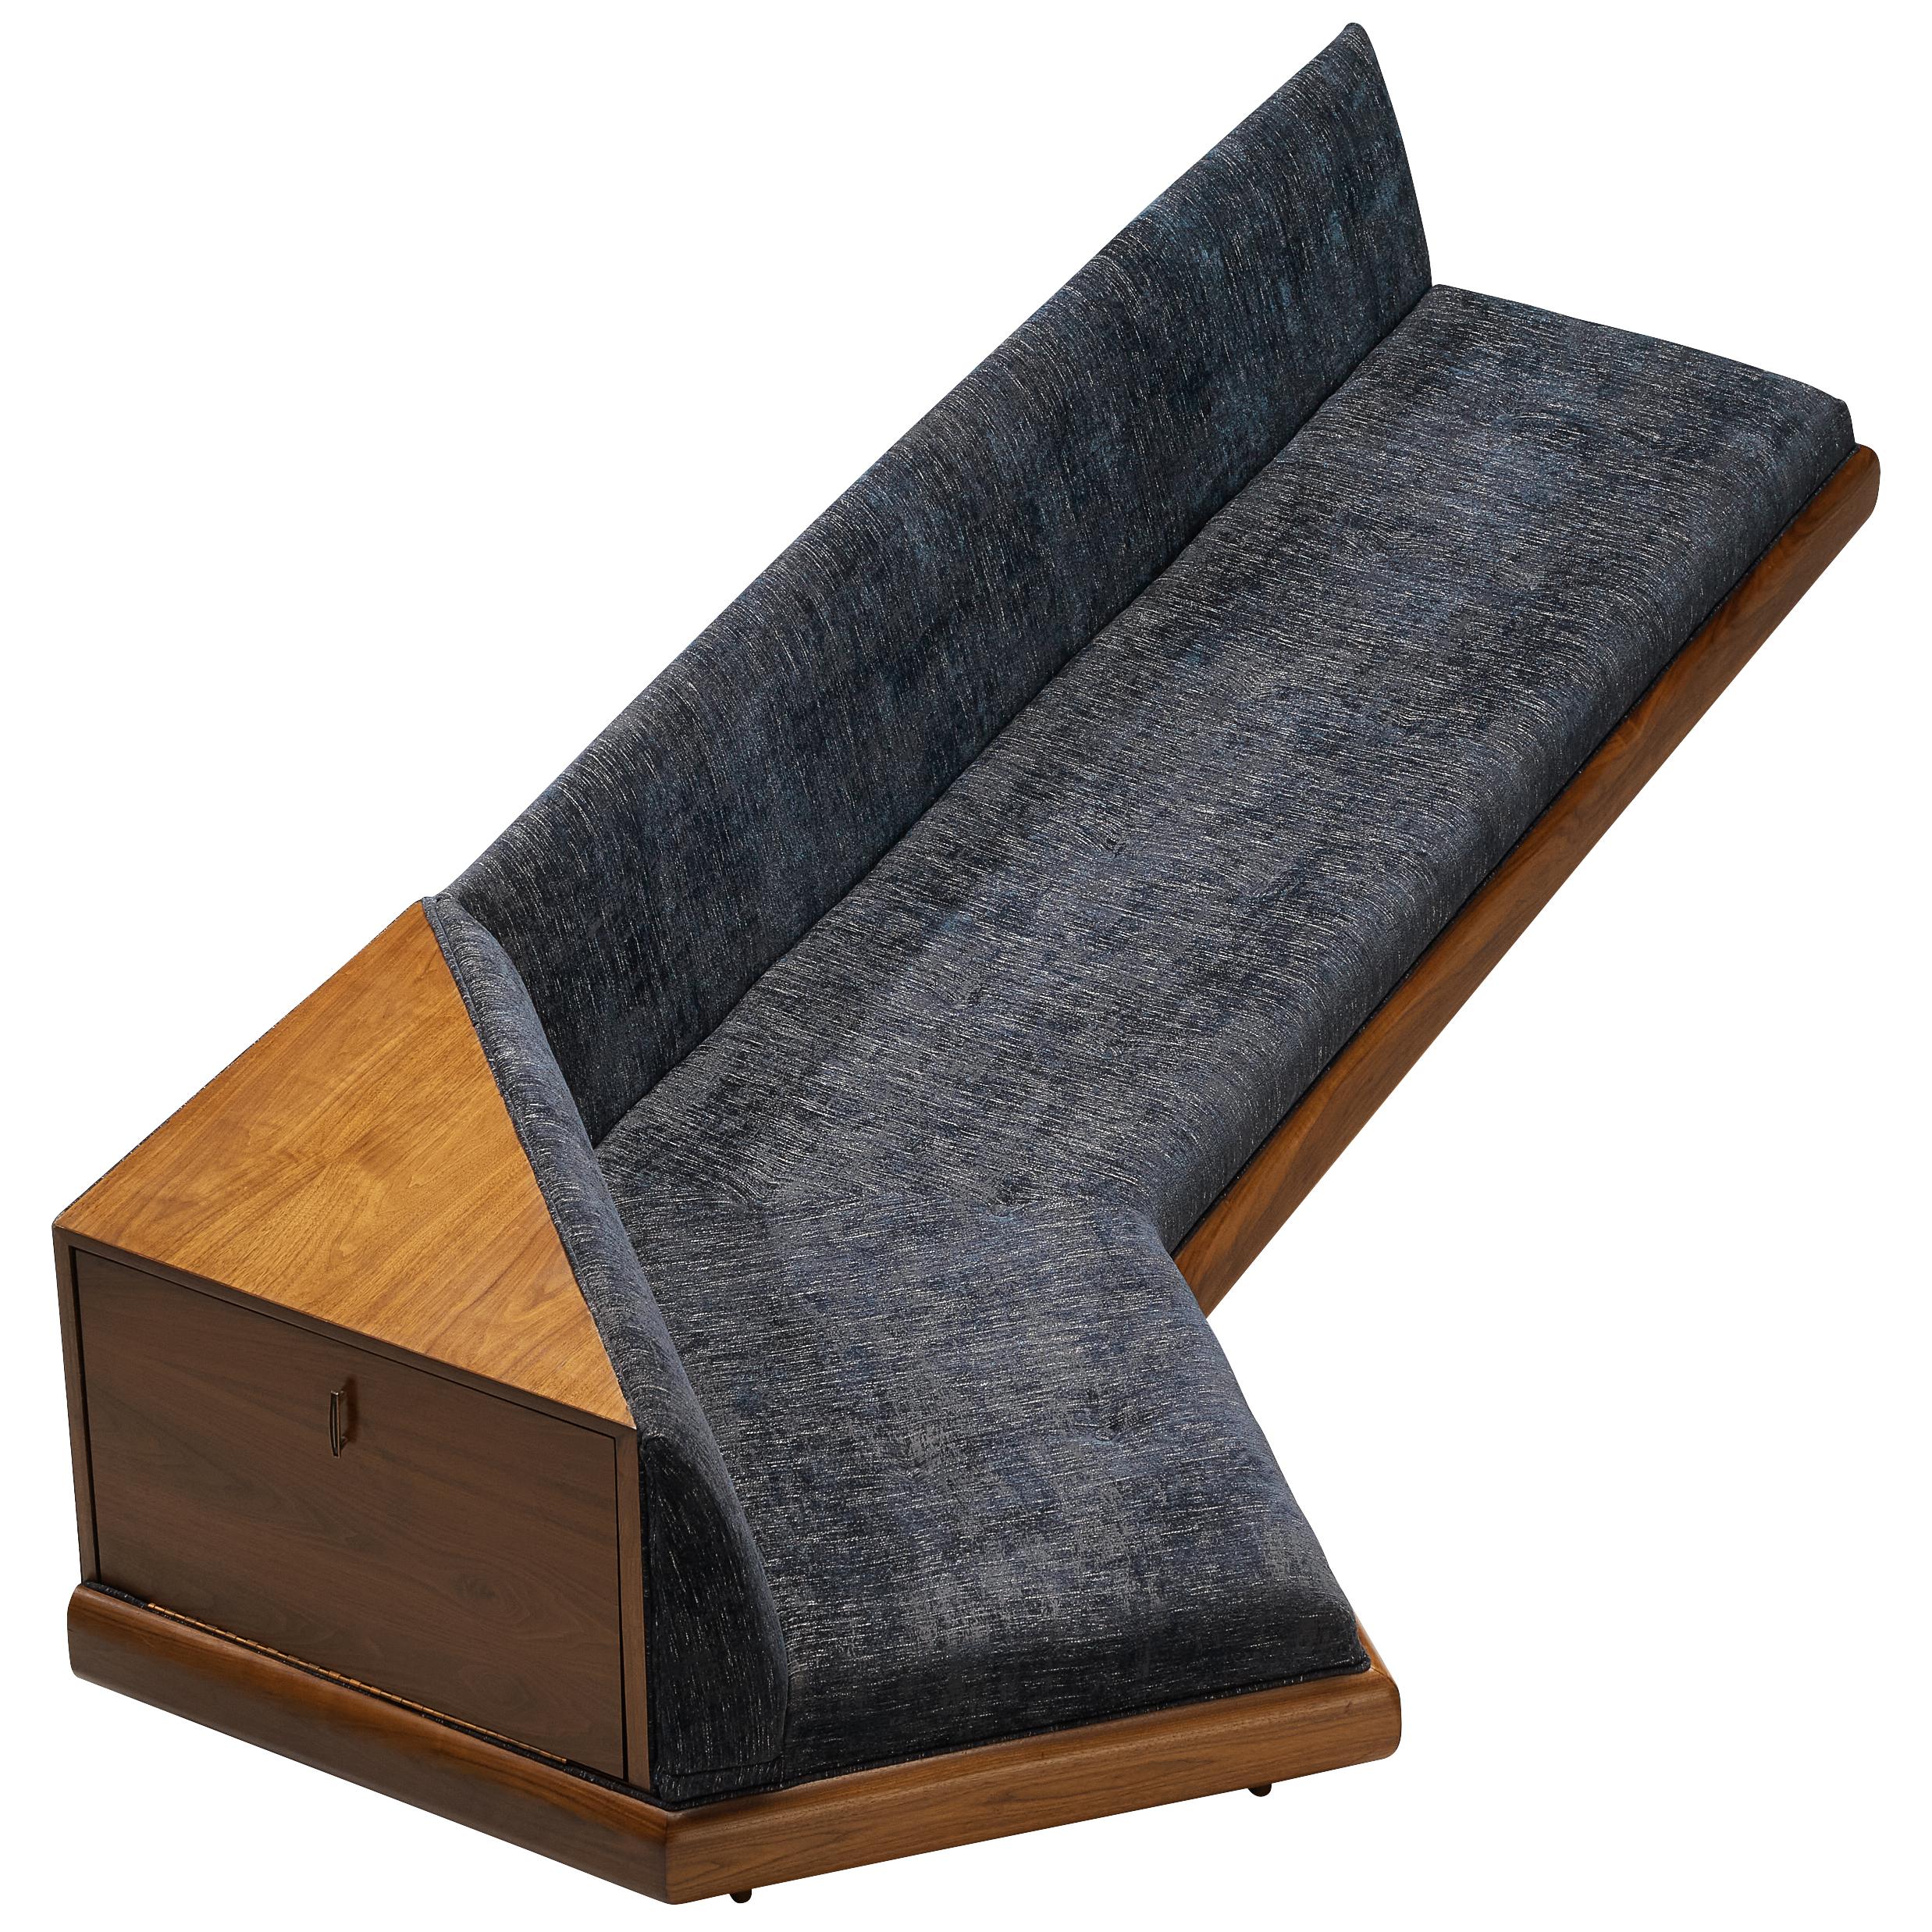 Adrian Pearsall Platform Sofa Model 2167S in Walnut and Blue Fabric